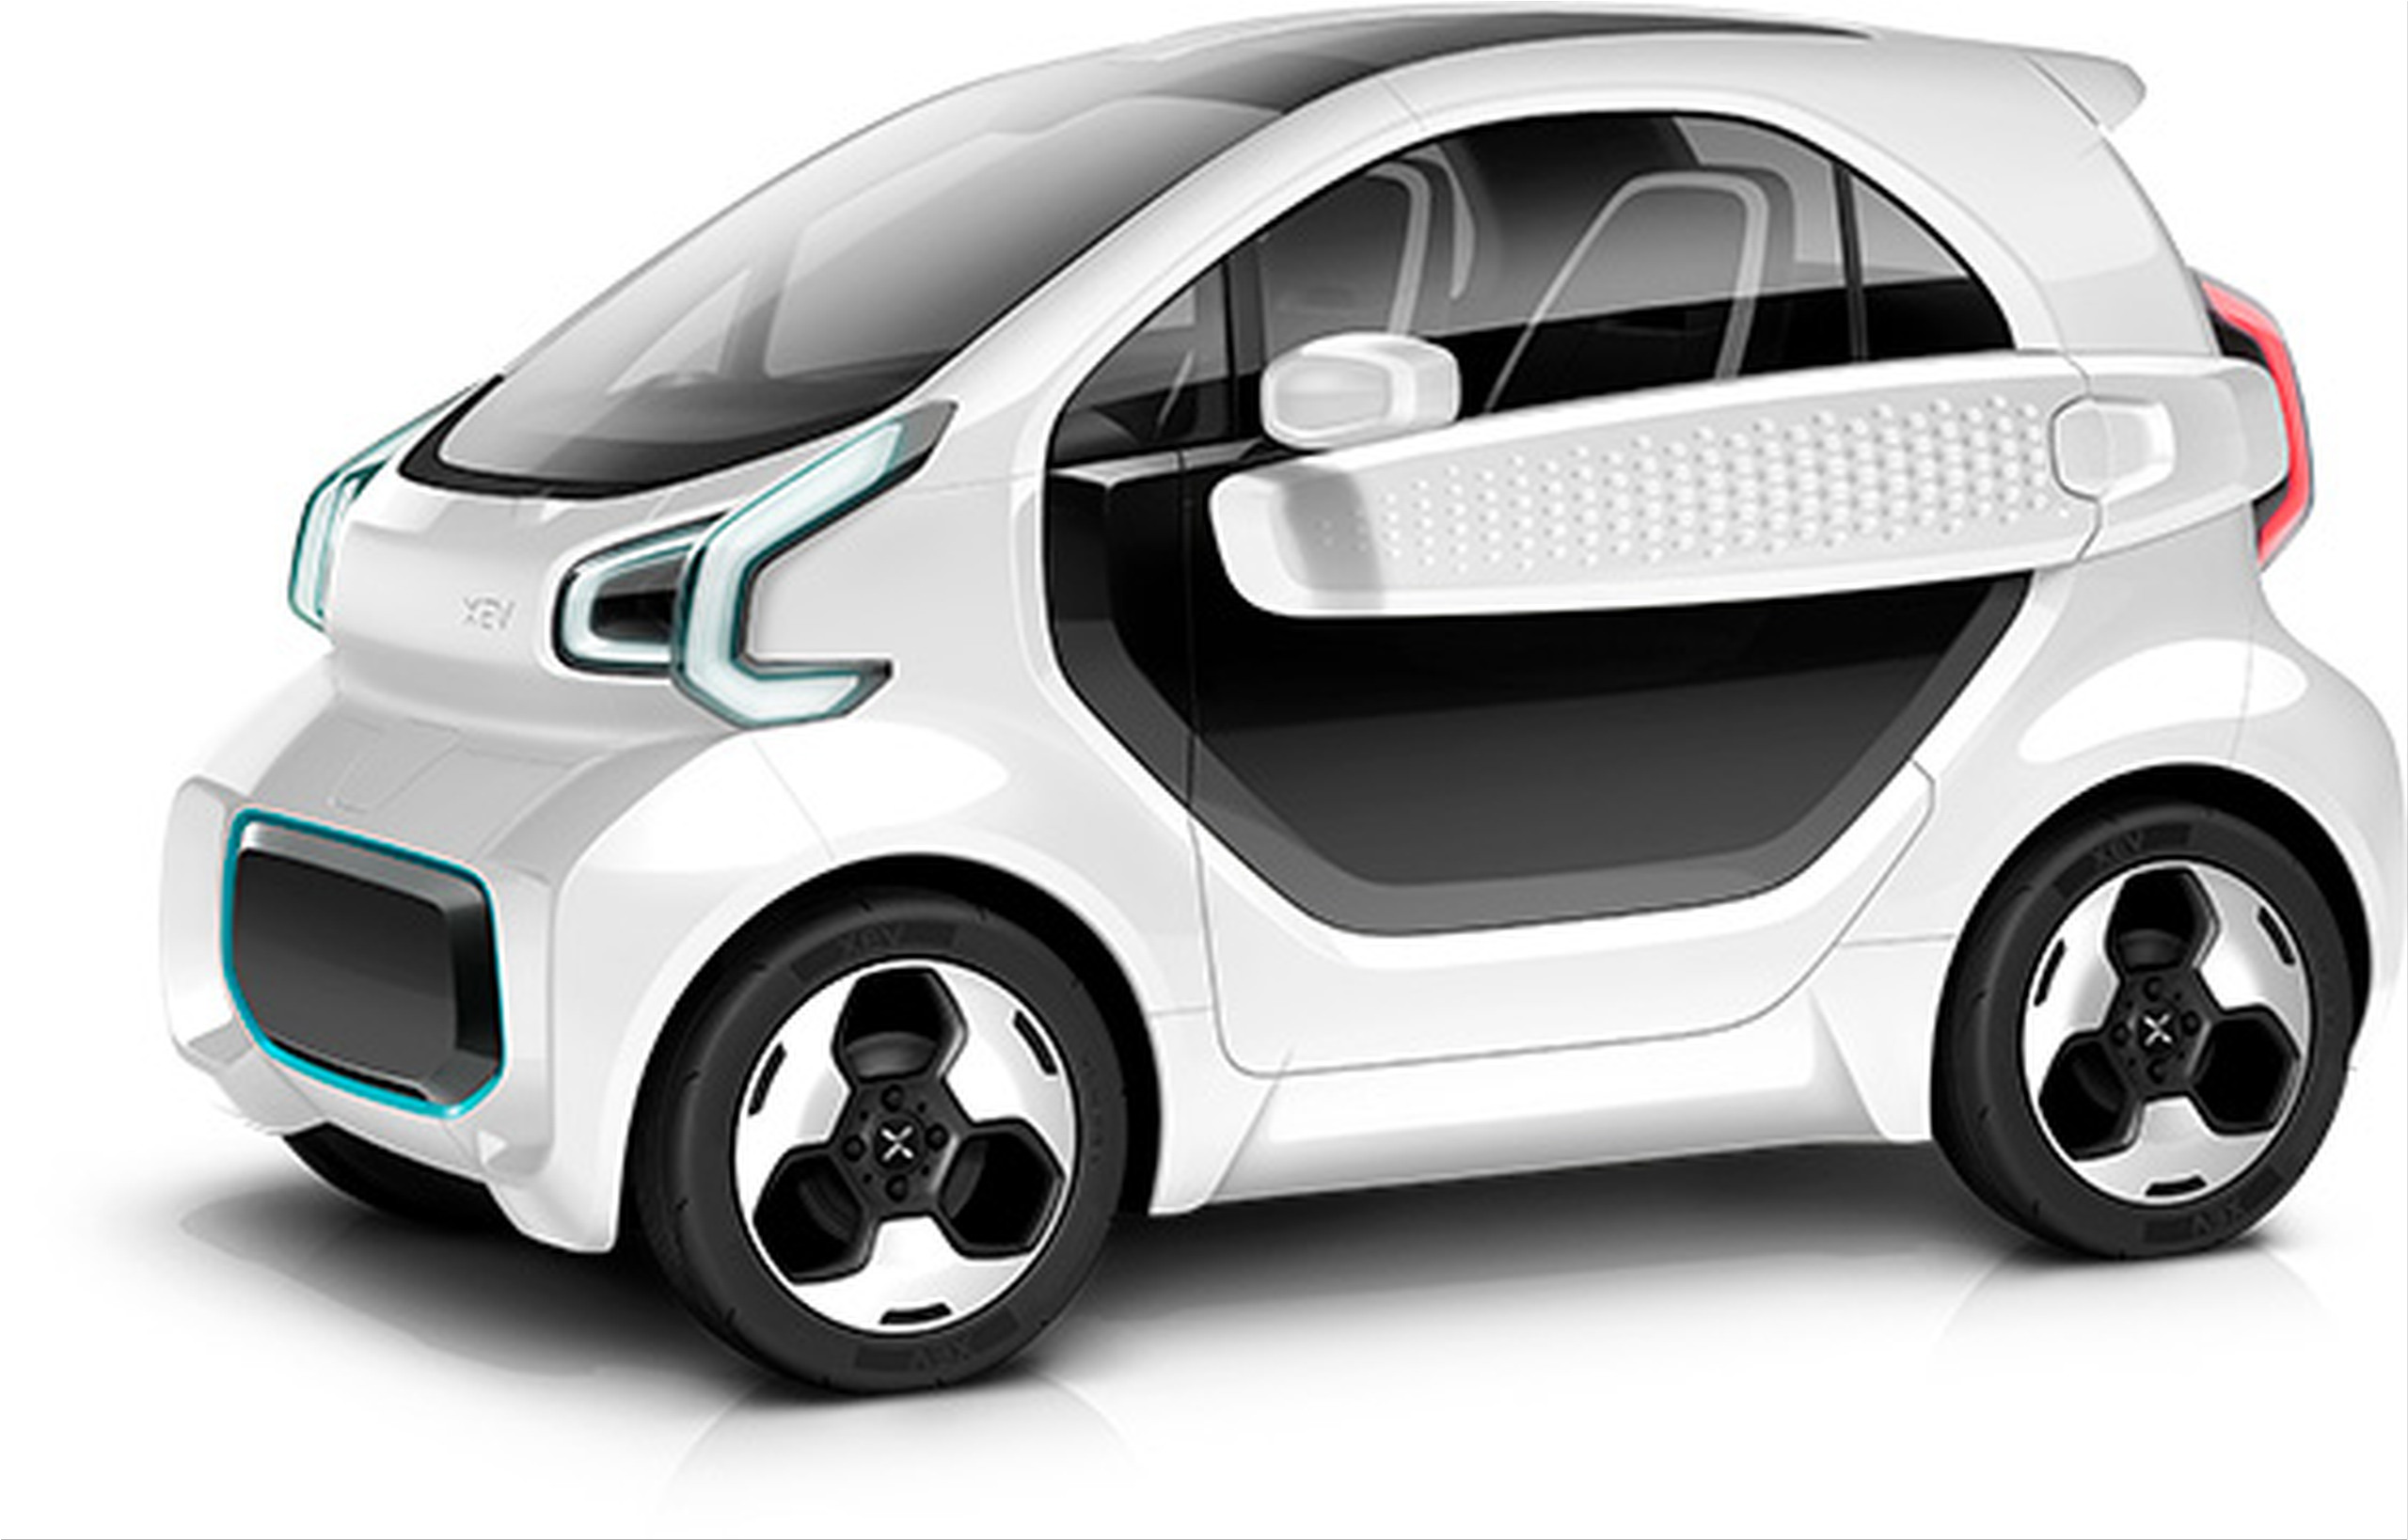 The exceptional XEV Yoyo is a small electric vehicle that costs less